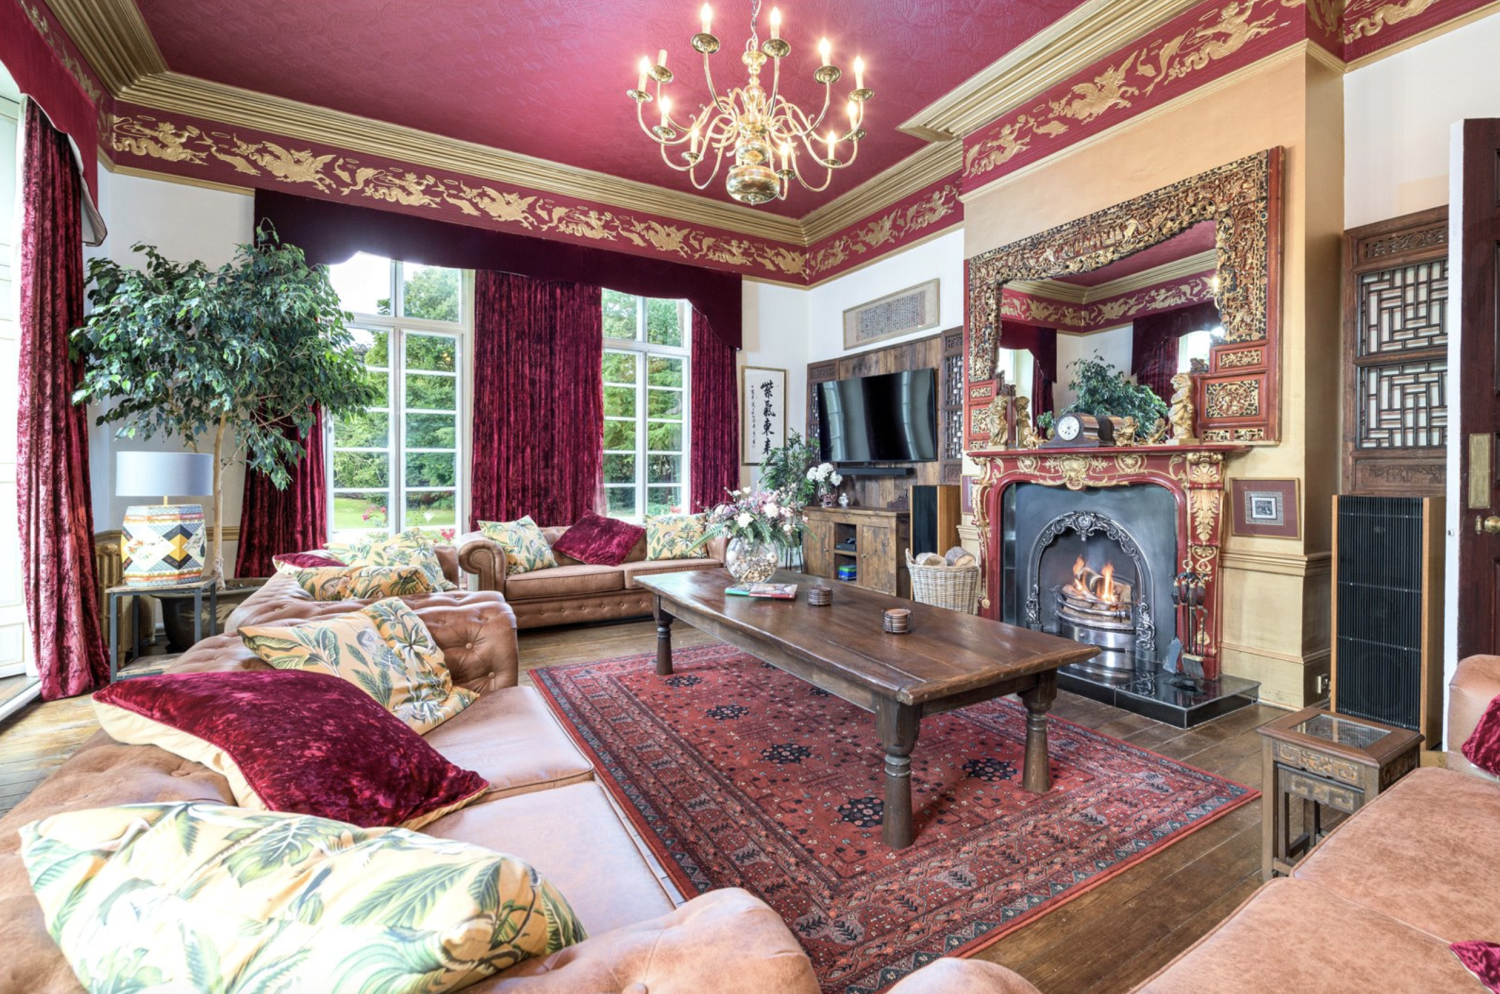 Sumptuous interior of a drawing room, with an open fire and gilded cornicing